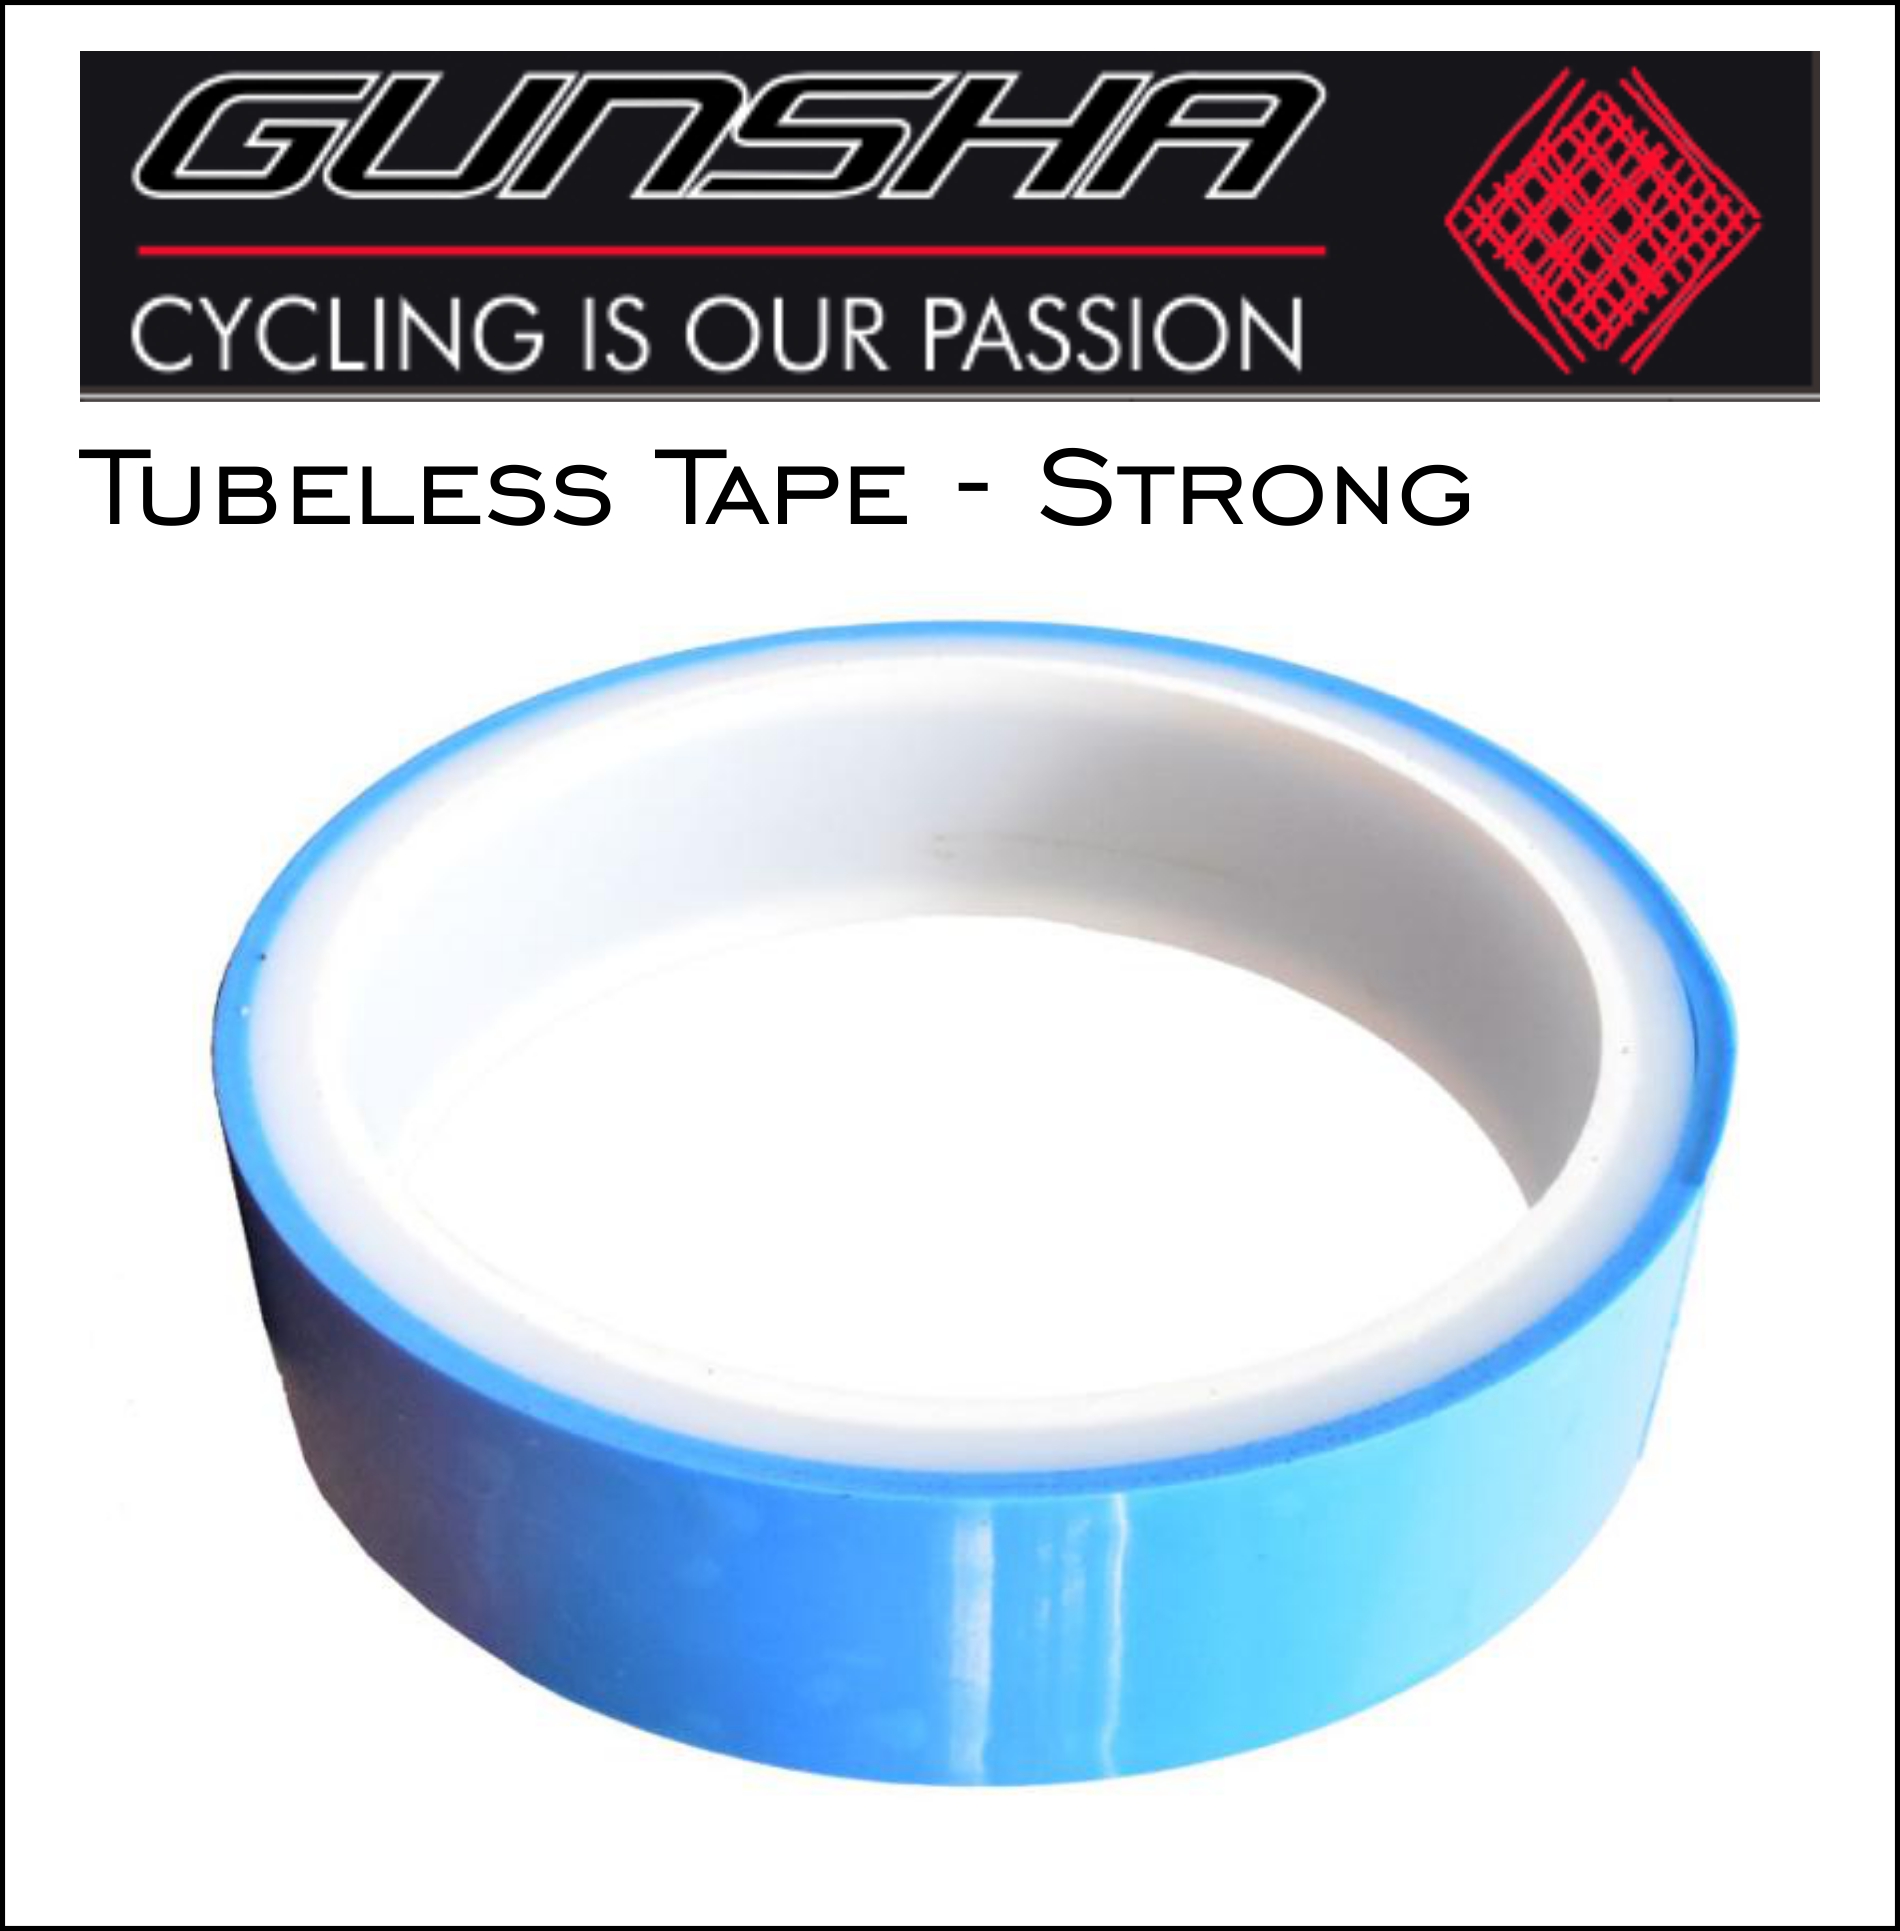 Tubeless Tape Strong